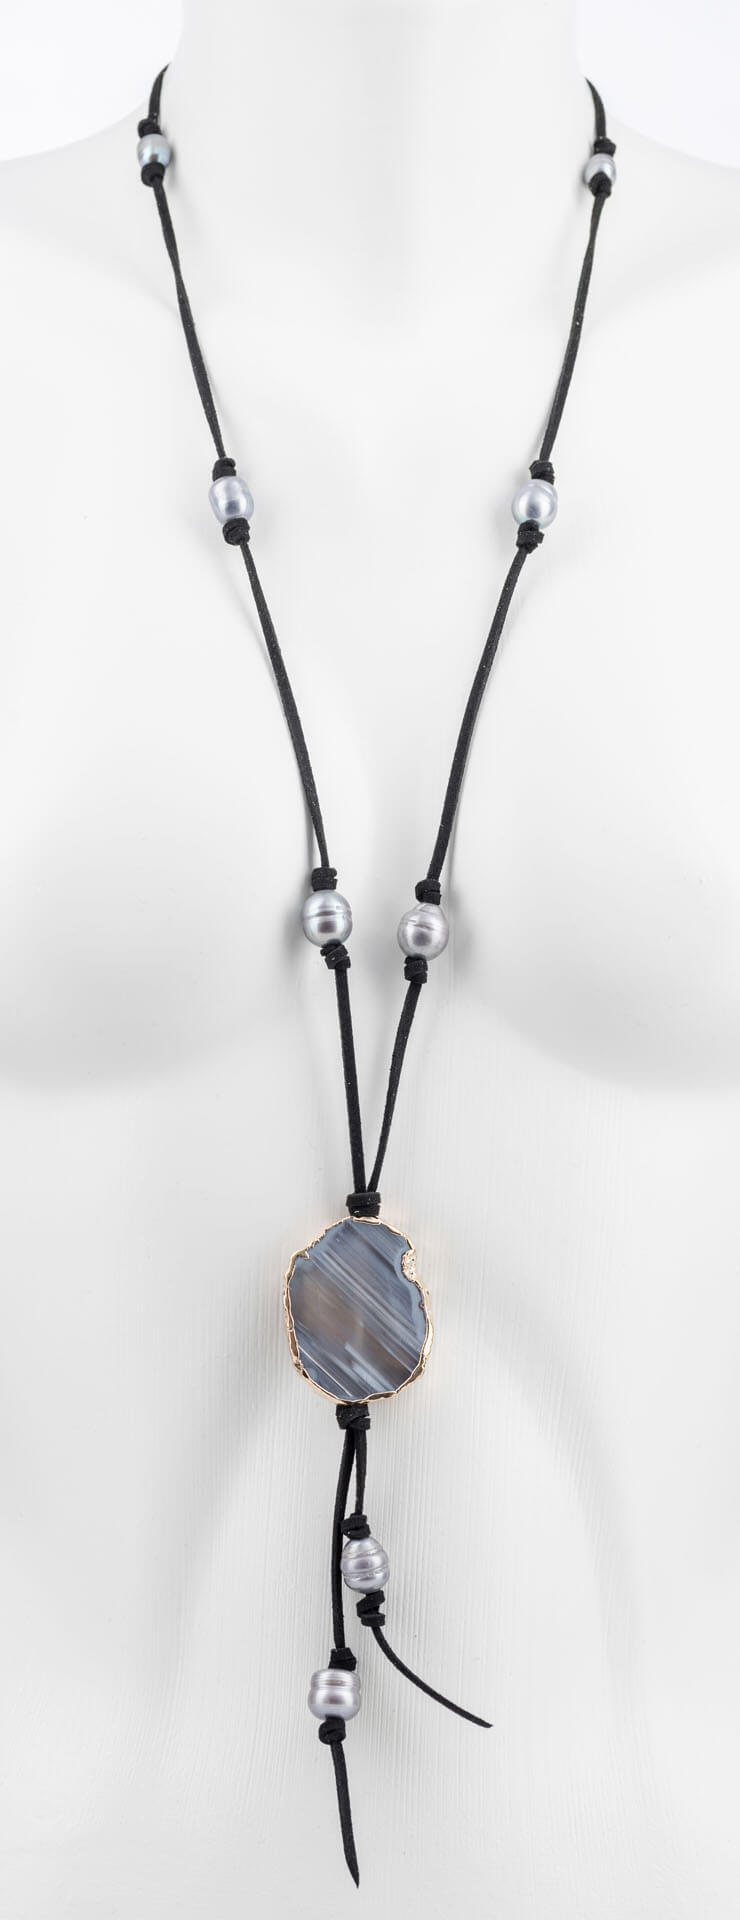 "Freshwater Pearls" long necklace with grey freshwater pearls and agate pendant - black